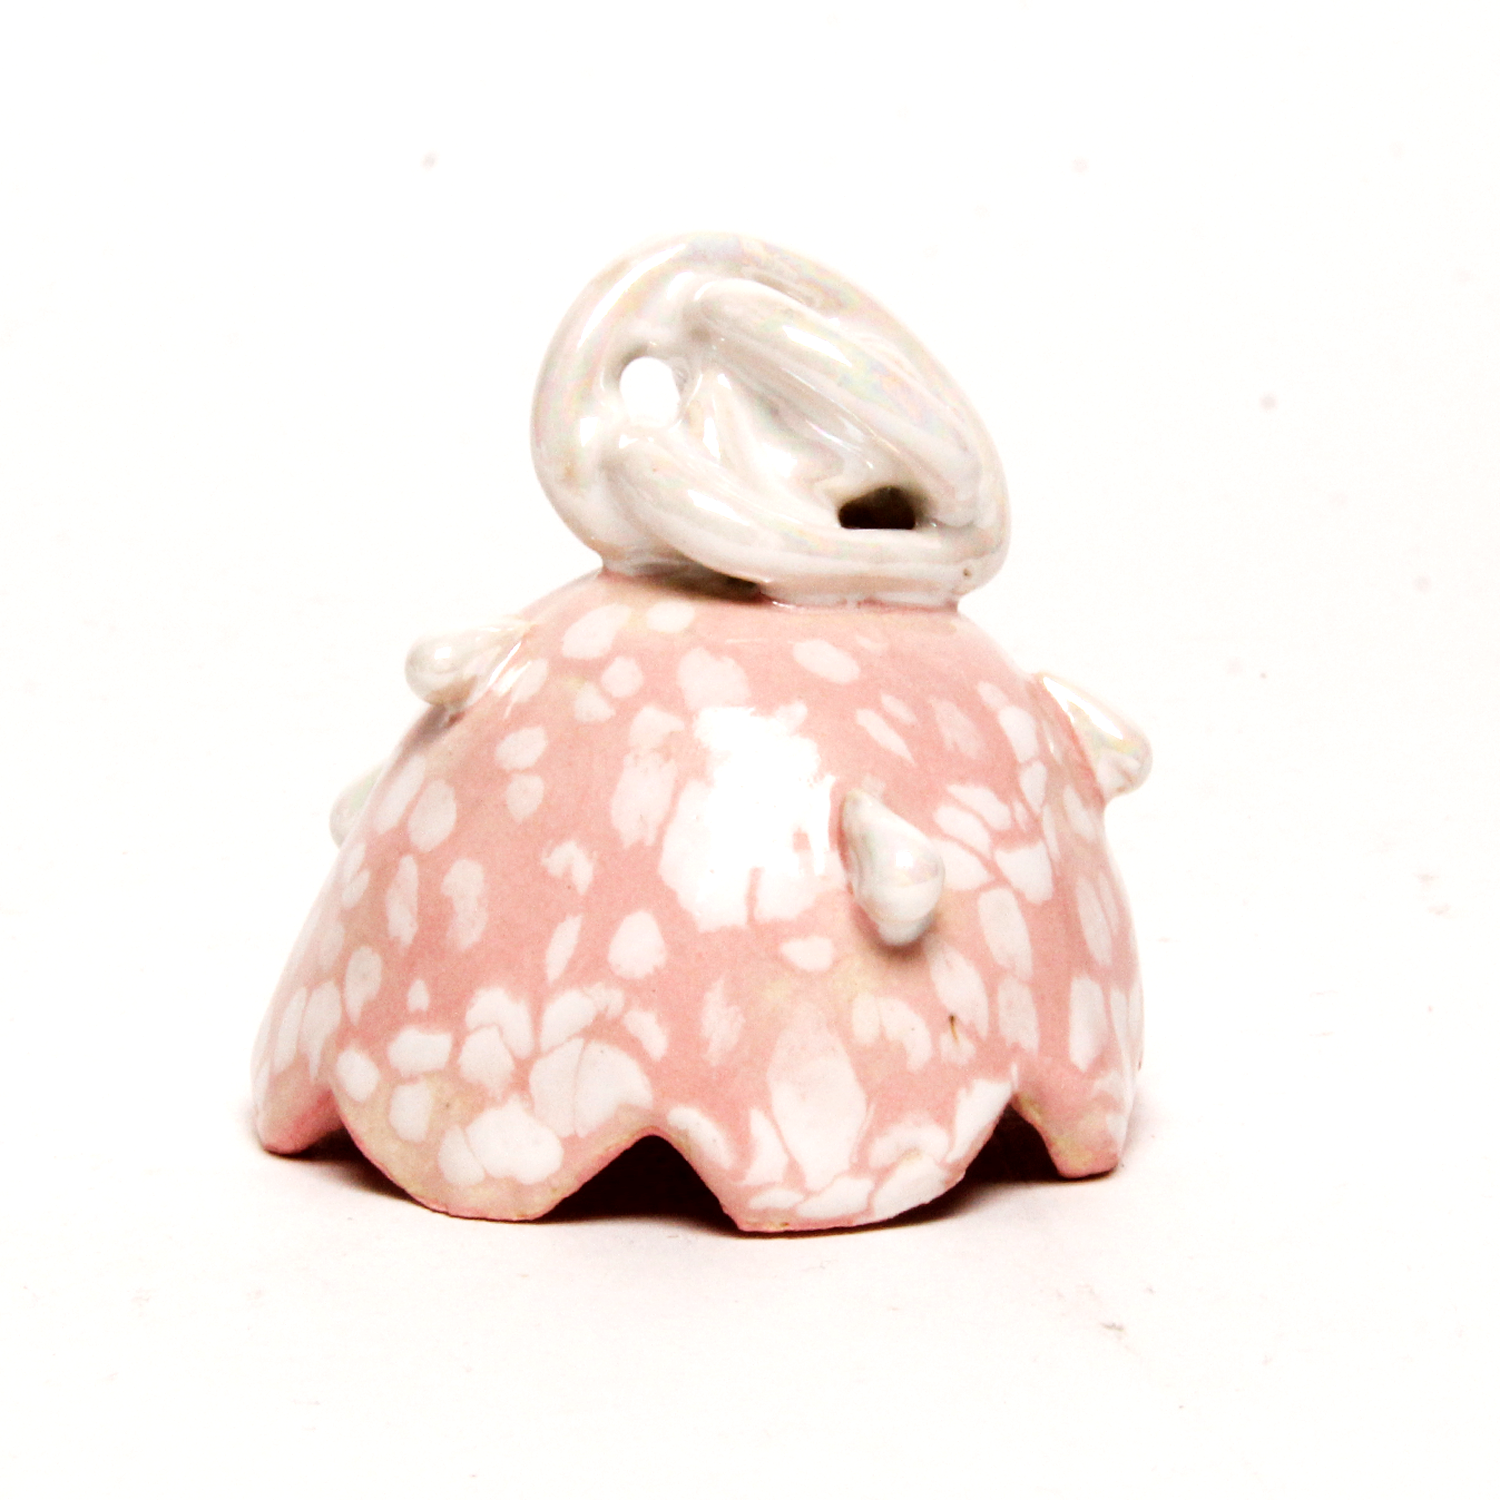 Hannah Faas: Small Sculpture in Raspberry Product Image 2 of 3